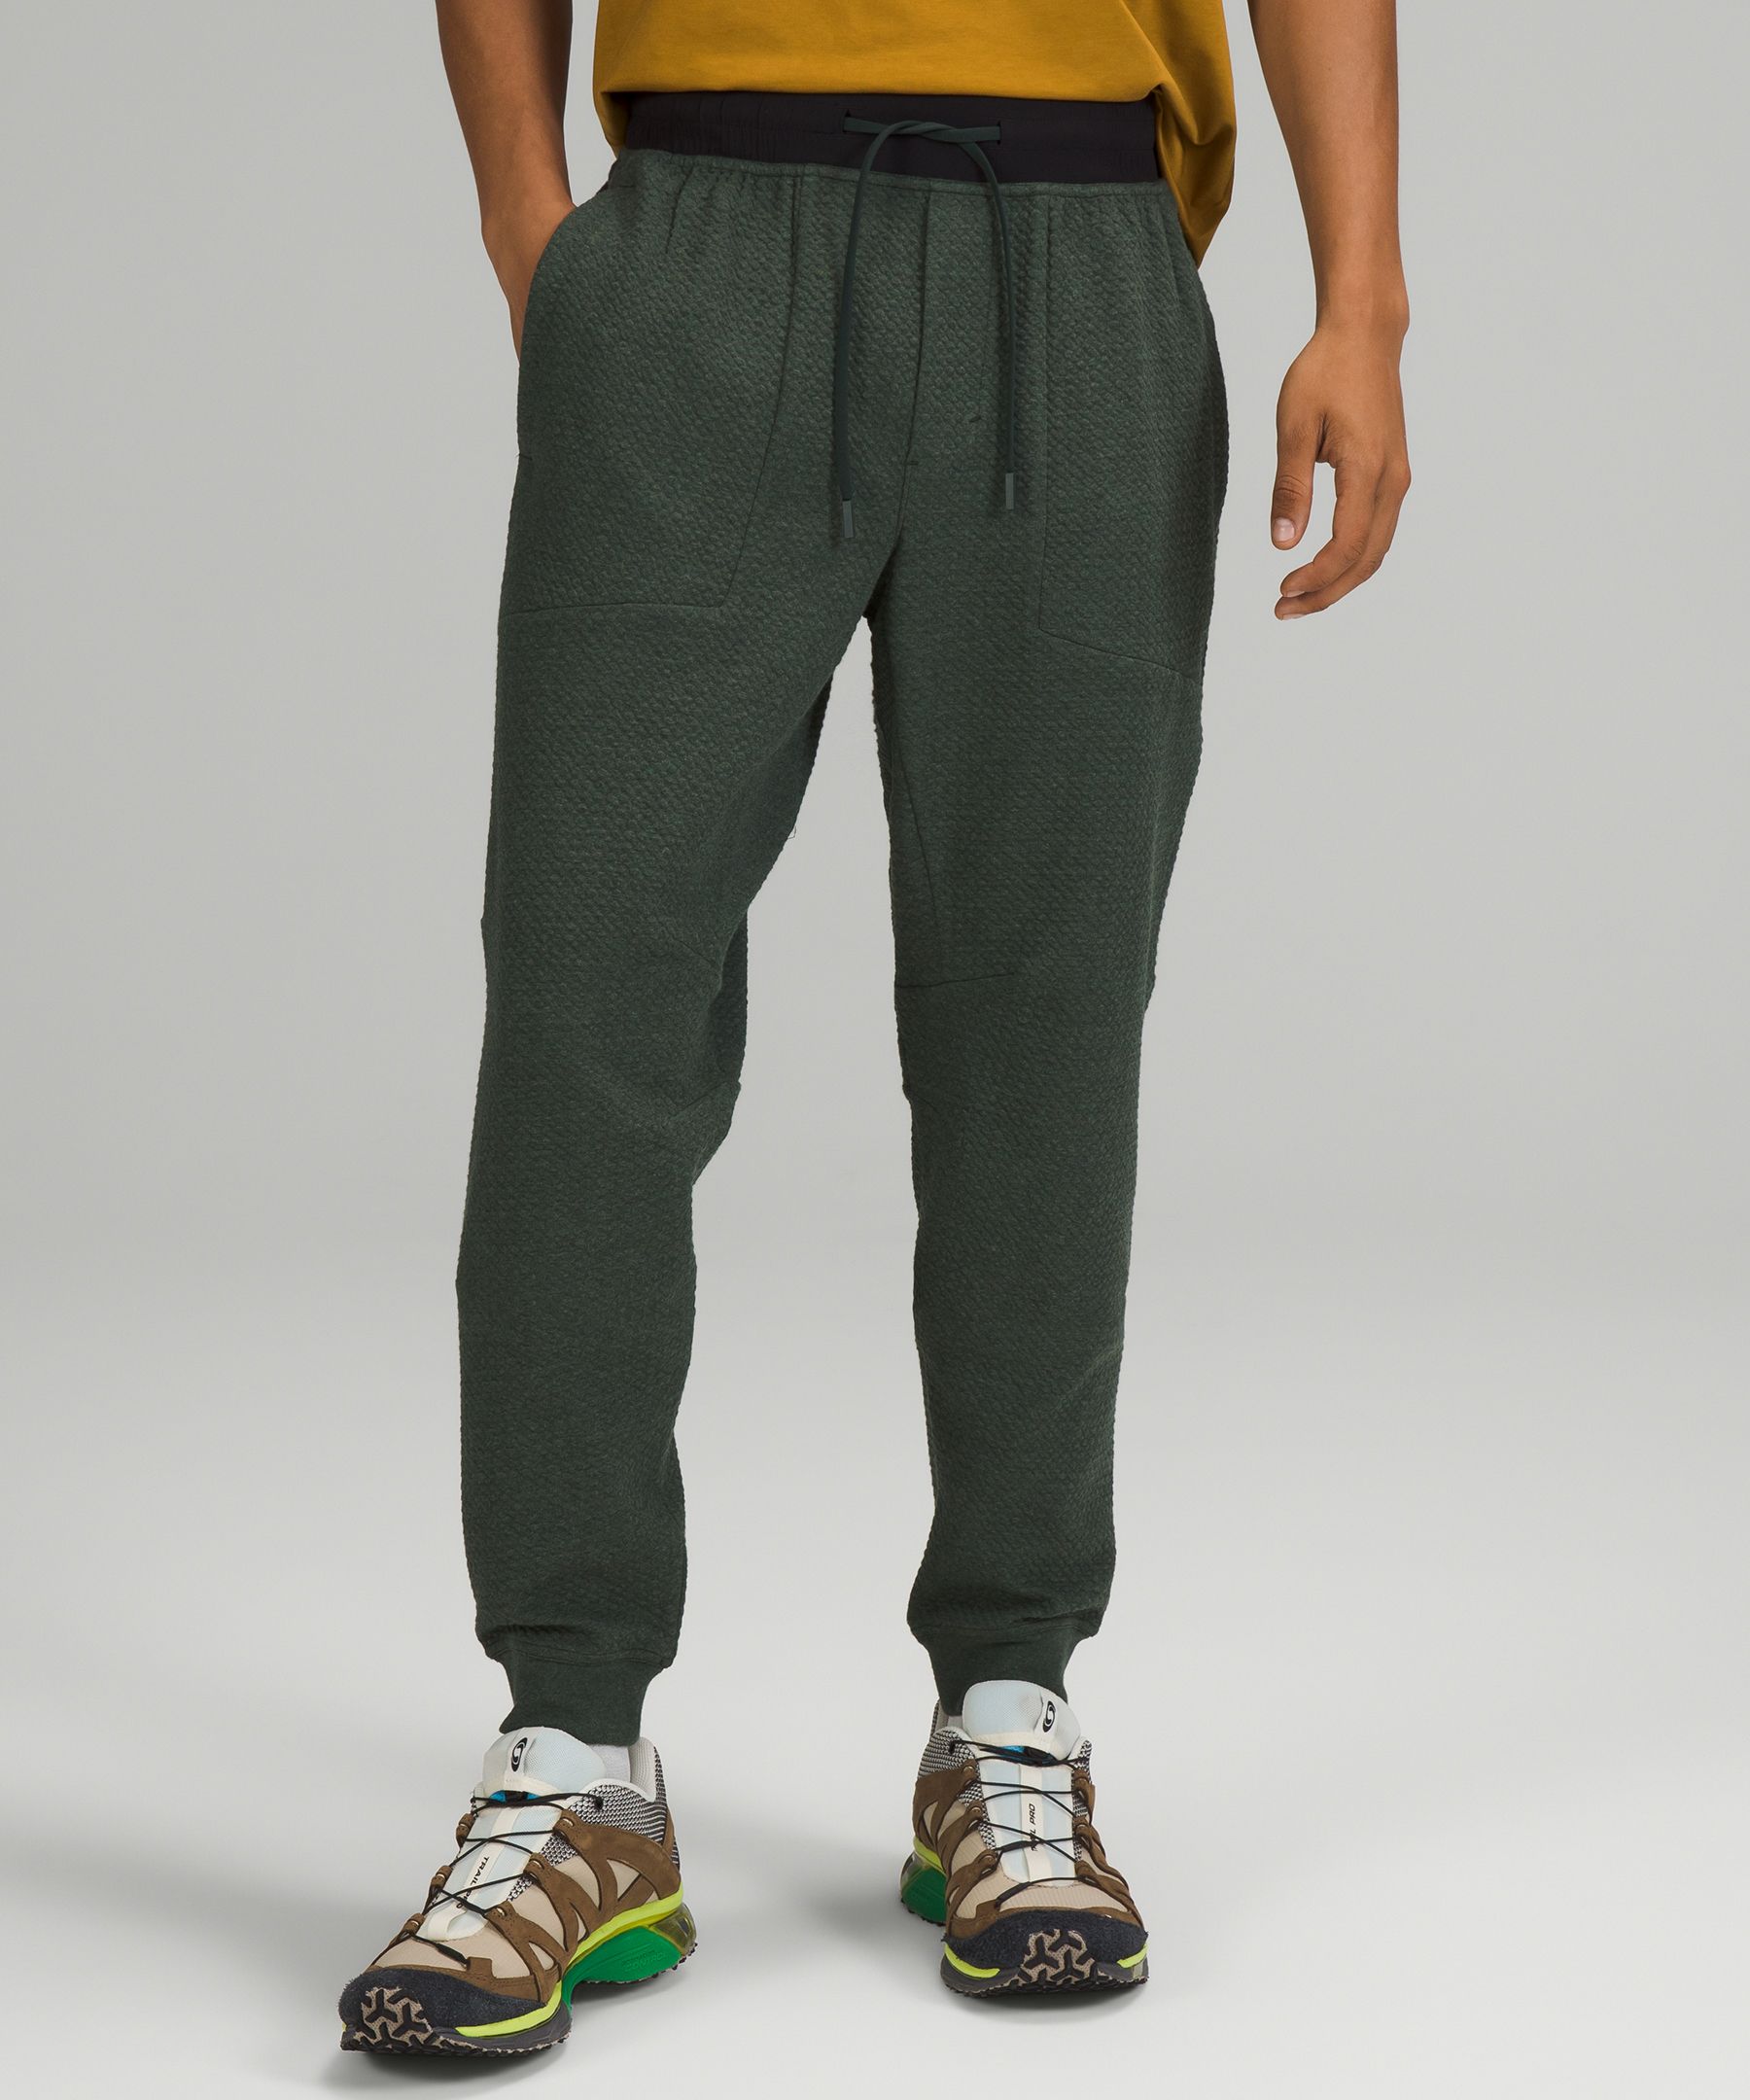 Lululemon At Ease Joggers In Heathered Rainforest Green/black